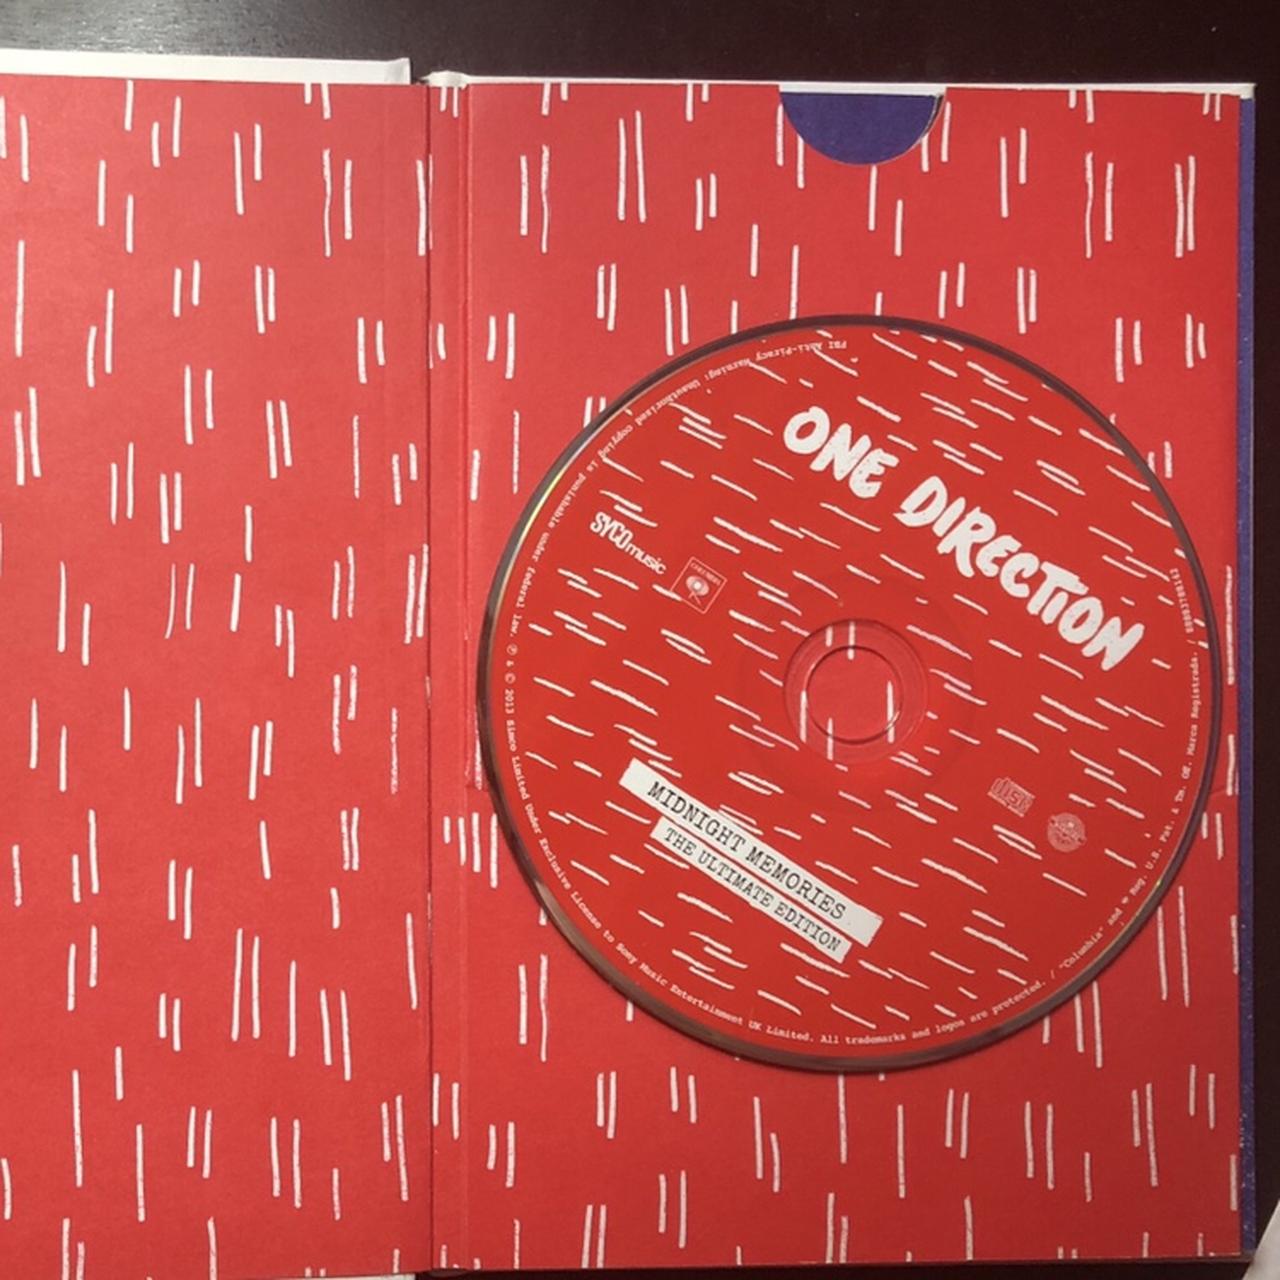 CD Bundle One direction (brand new and sealed) - Depop